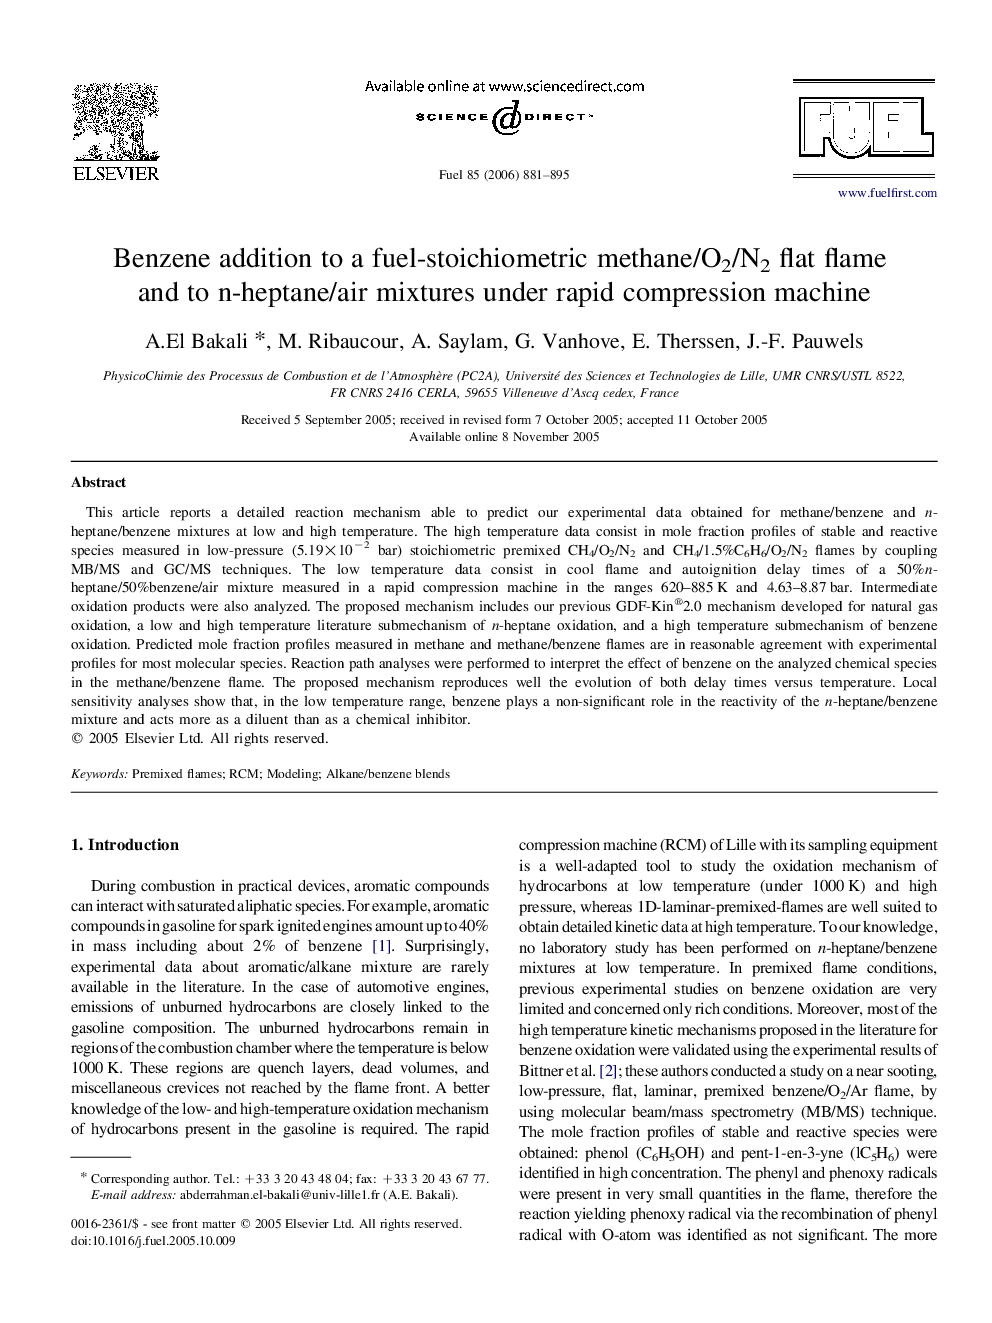 Benzene addition to a fuel-stoichiometric methane/O2/N2 flat flame and to n-heptane/air mixtures under rapid compression machine